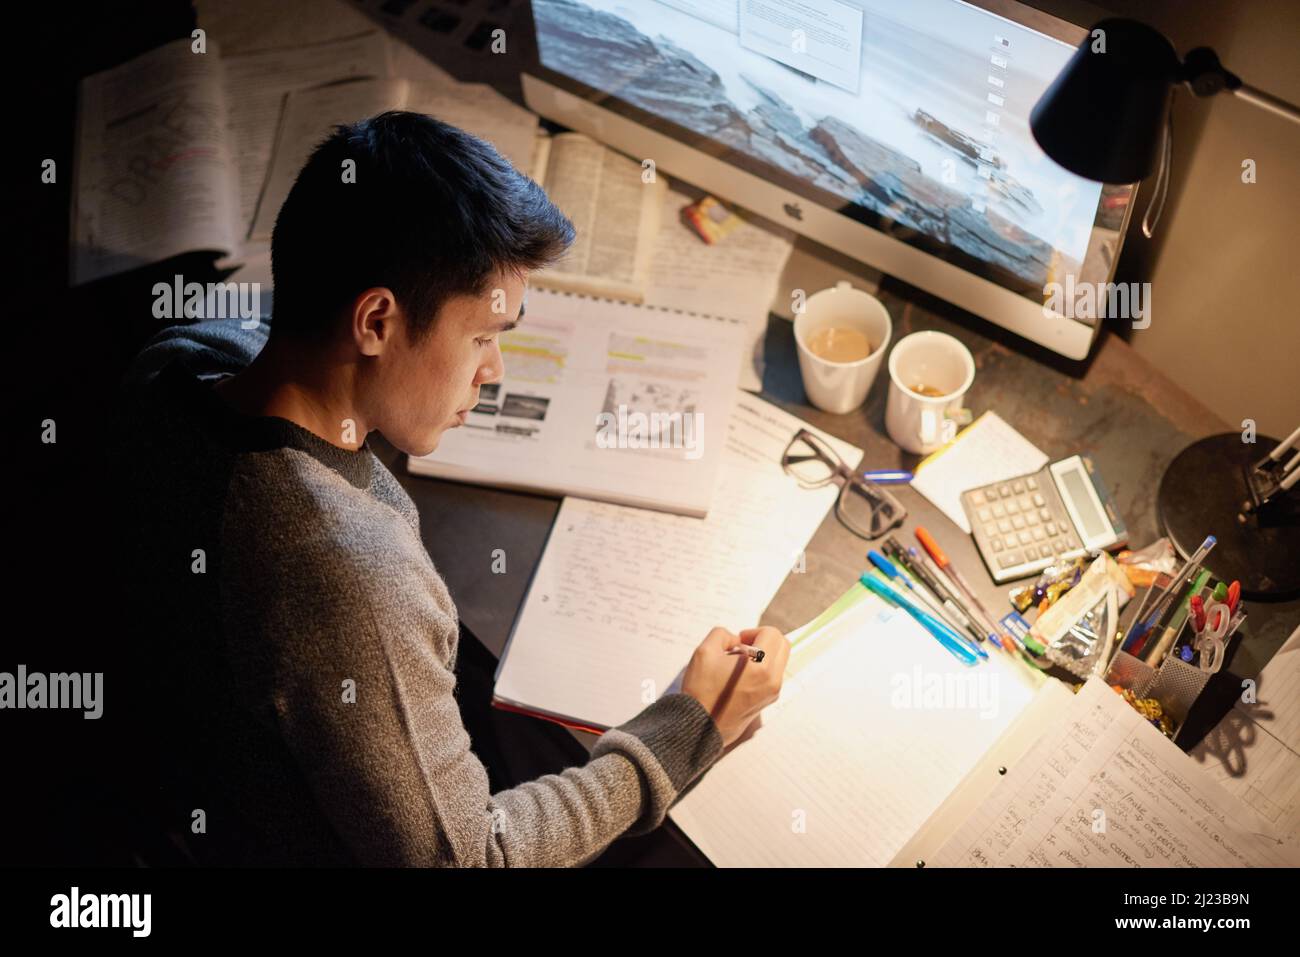 All night cramming. Cropped shot of a young student studying late into the night. Stock Photo